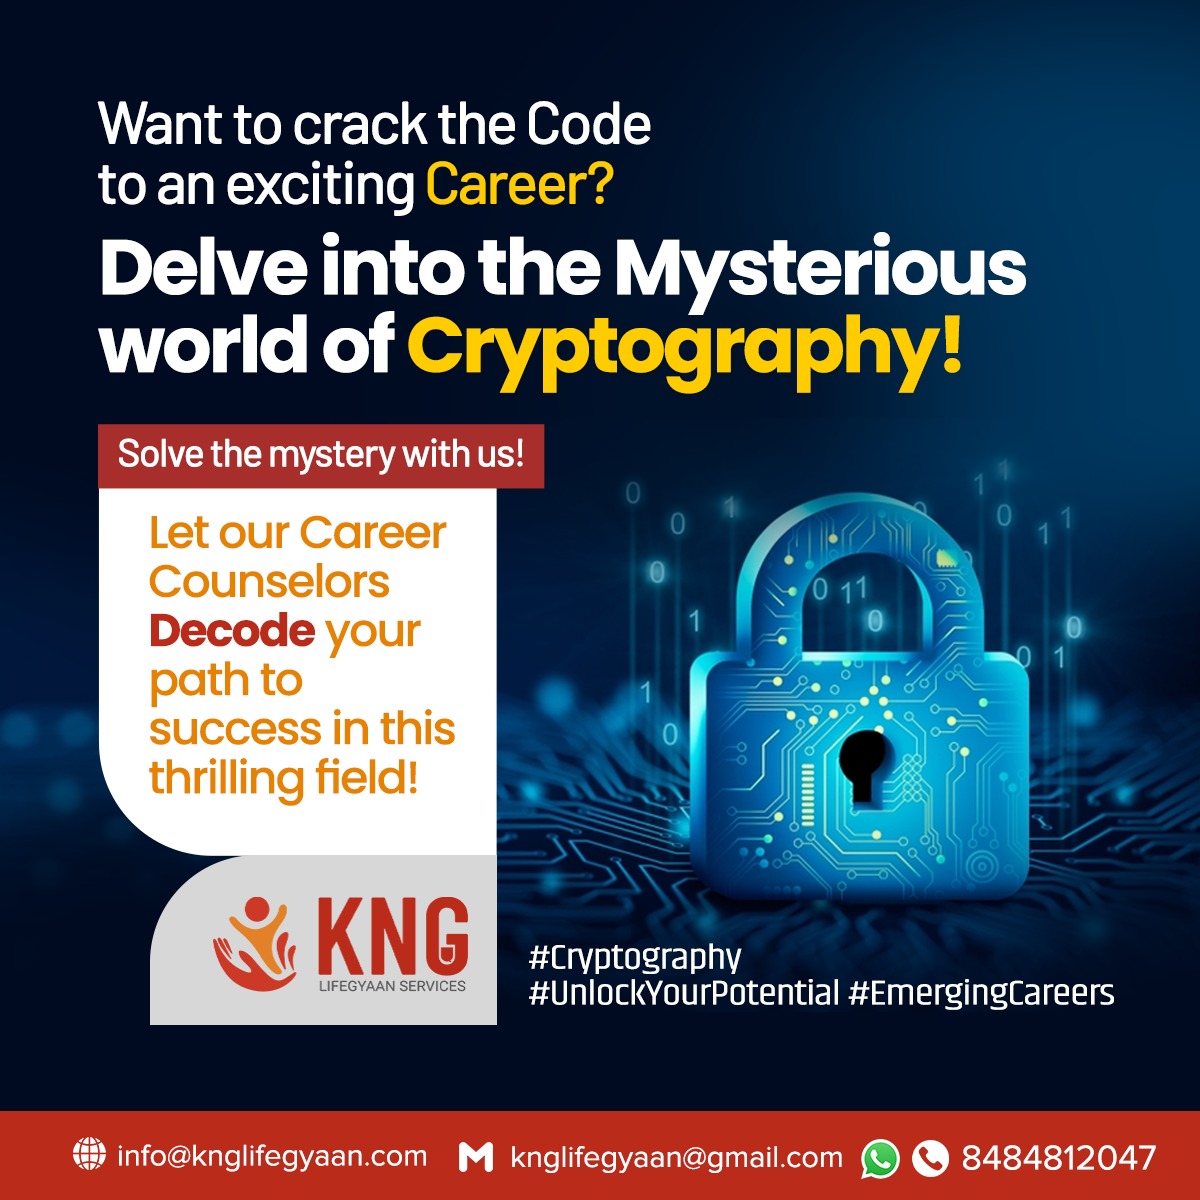 Want to crack the Code to an exciting Career?
Delve into the Mysterious world of Cryptography!
Solve the mystery with us!
Let our Career  Counselors  Decode your path to success in this thrilling field! 

💻🔒 #Cryptography #UnlockYourPotential#EmergingCareers